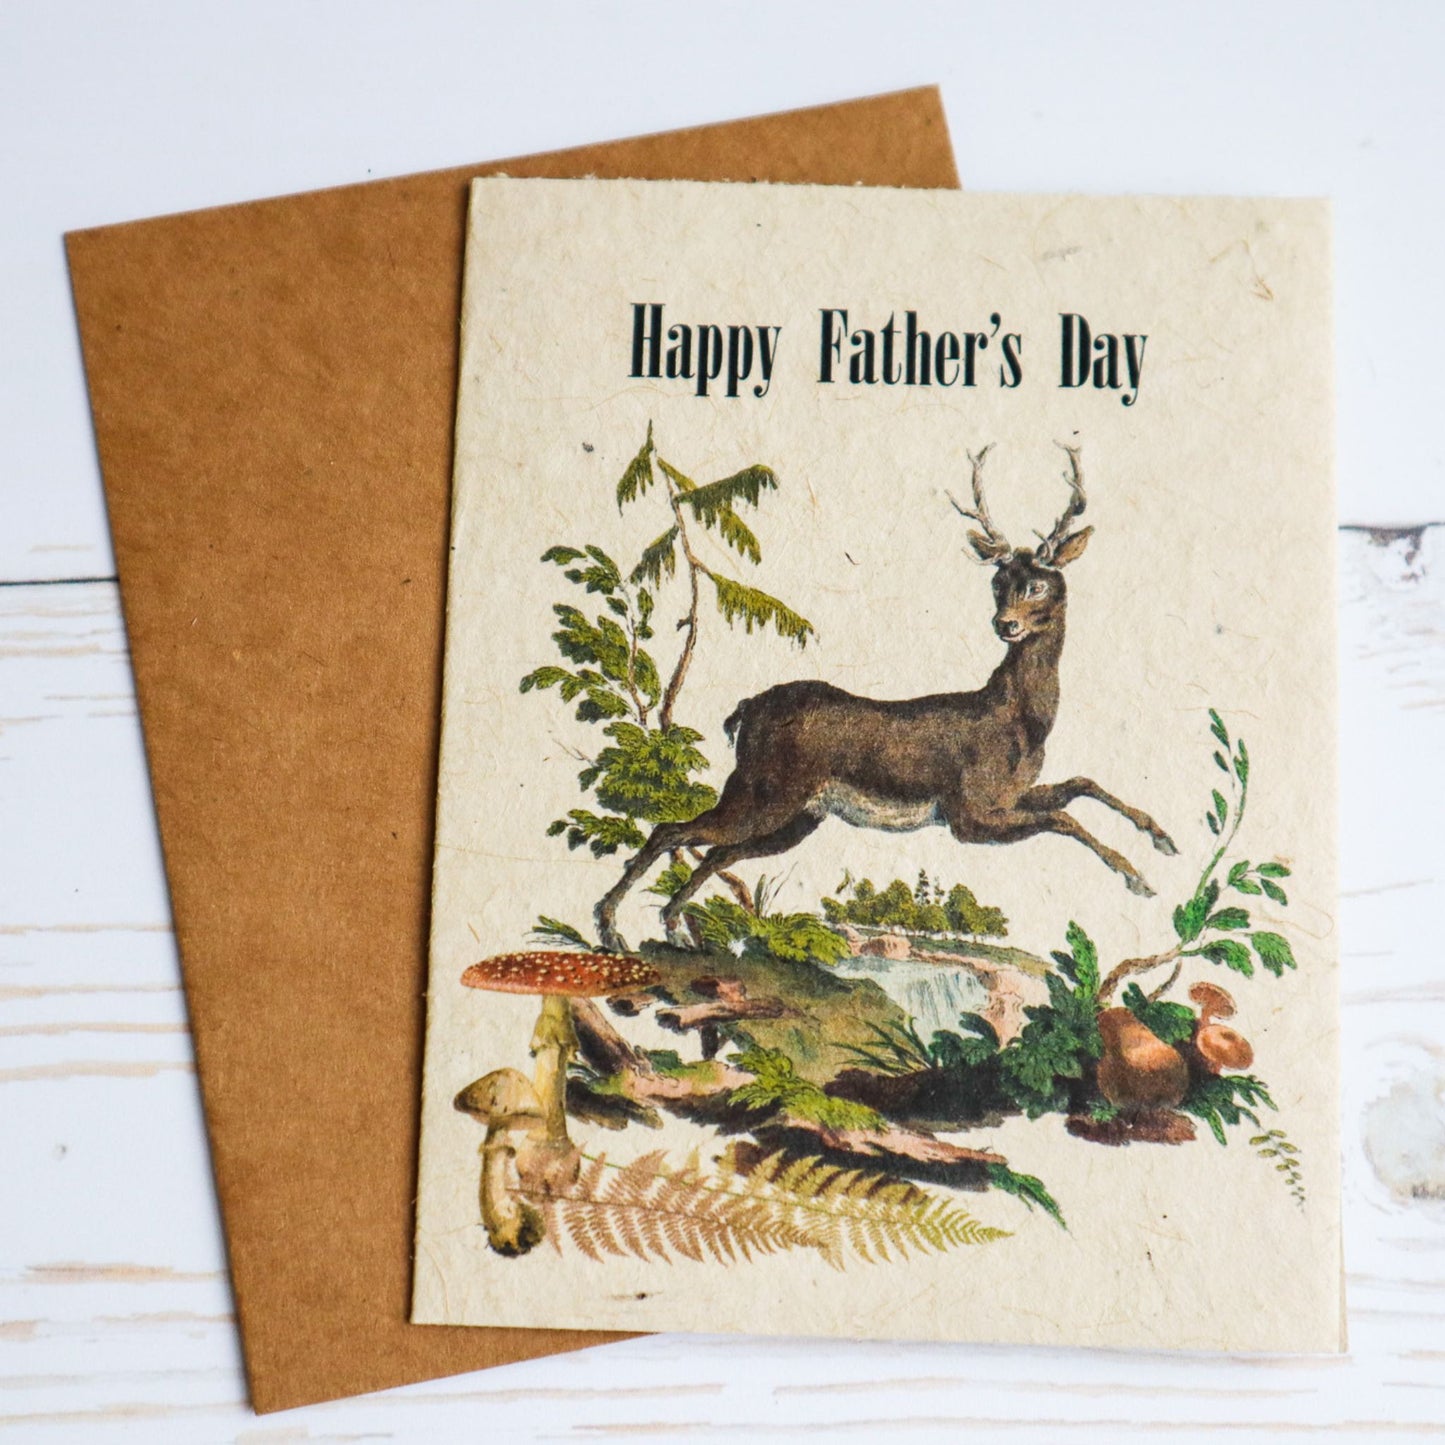 Father's Day card with deer greeting card that is eco friendly and plantable